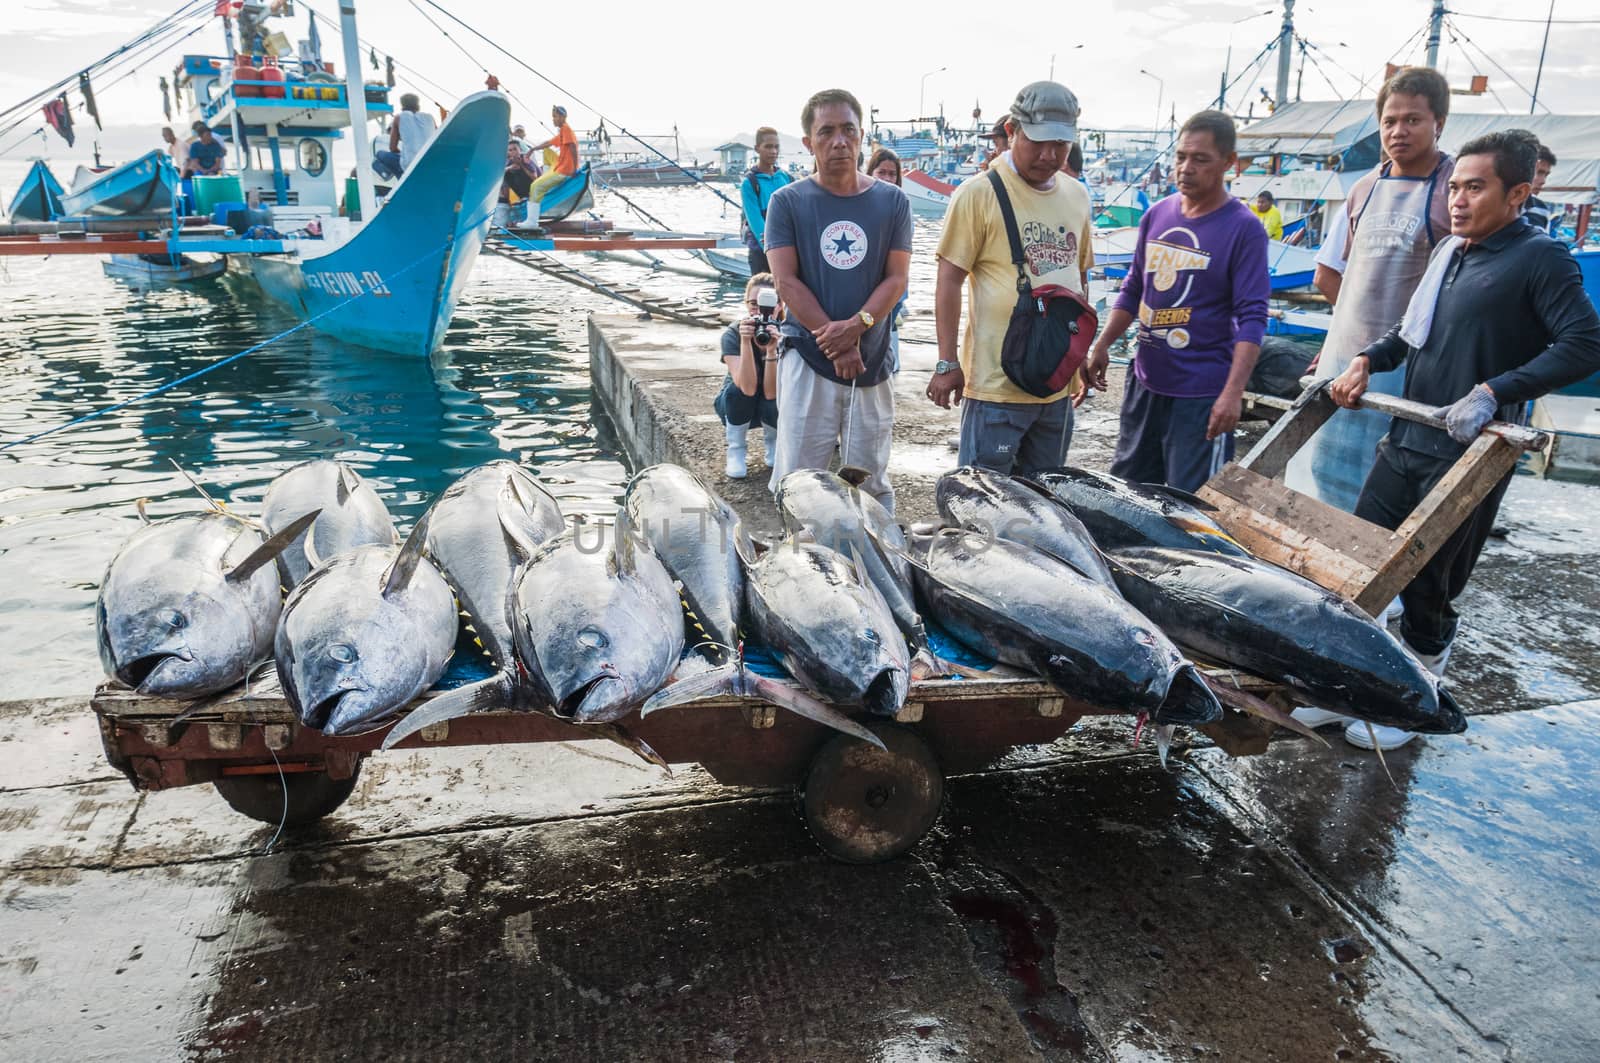 General Santos City - September 1, 2016: Yellowfin tuna being unloaded at the Tuna Harbor in General Santos City, South Cotabato, The Philippines. General Santos is the Tuna Capital of The Philippines, and the tuna industry is an important contributor the the city’s economy with export worldwide.